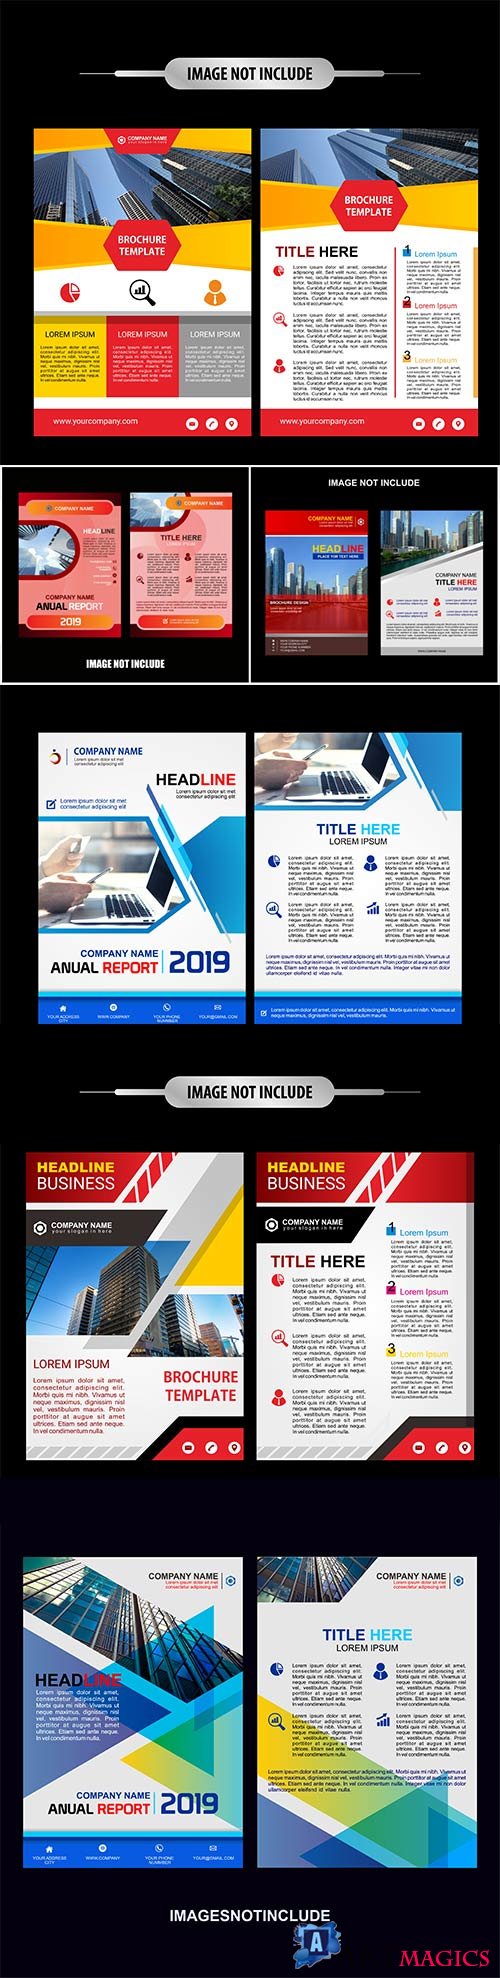 Brochure template vector layout design, corporate business annual report, magazine, flyer mockup # 225